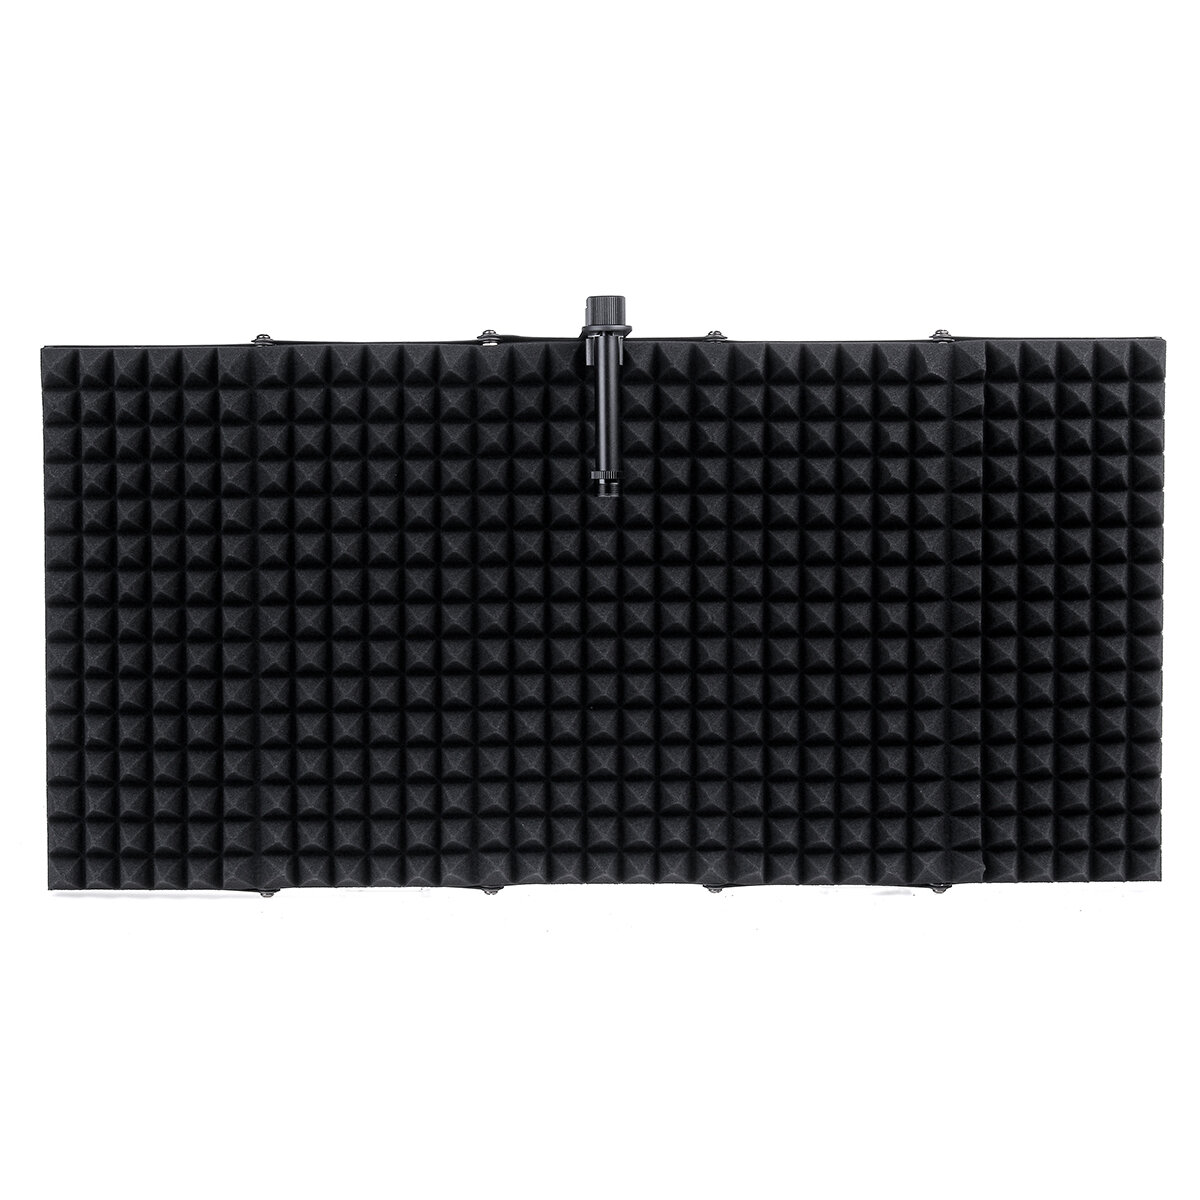 5 Panel Foldable Studio Microphone Isolation Shield Recording Sound Absorber Foam Panel Support Bracket COD